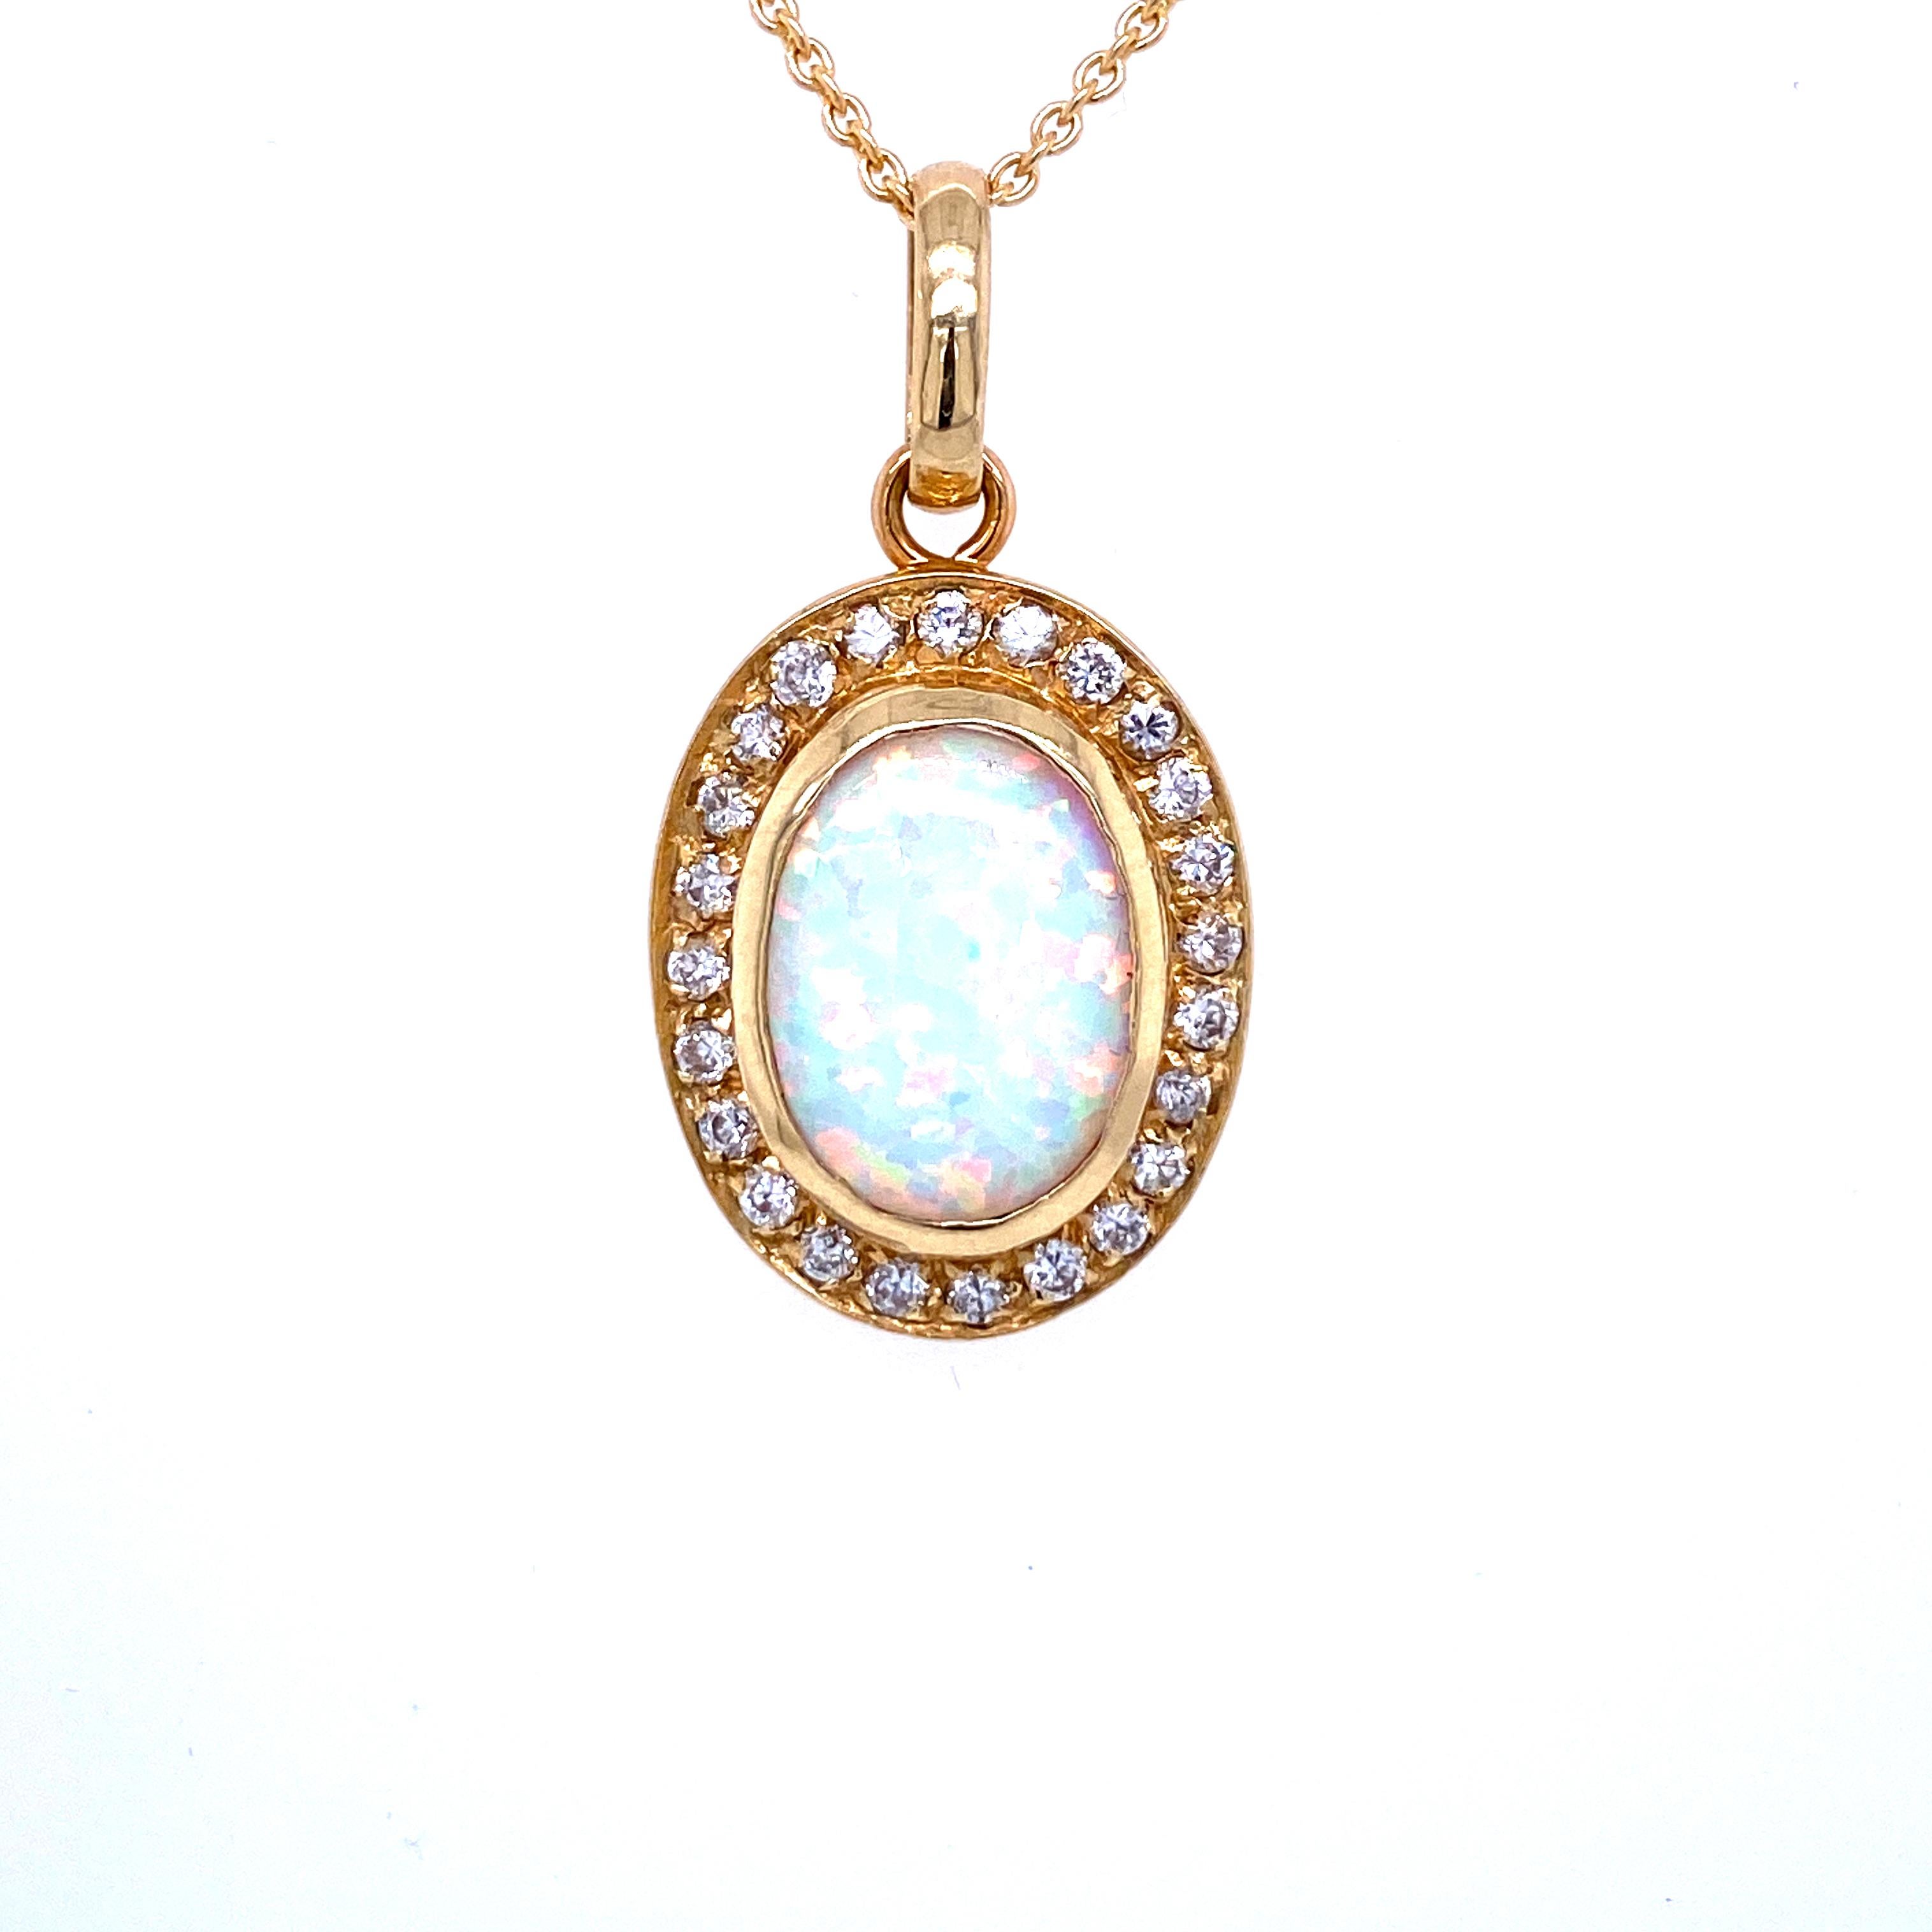 A classy vintage piece features in the middle a wonderful Natural Ethiopian Opal weighing 2 carats surrounded by Sparkling Round brilliant cut Diamonds for a total weight of 0.50 carat G color Vvs1 clarity. The pendant is set in a 18k yellow gold,